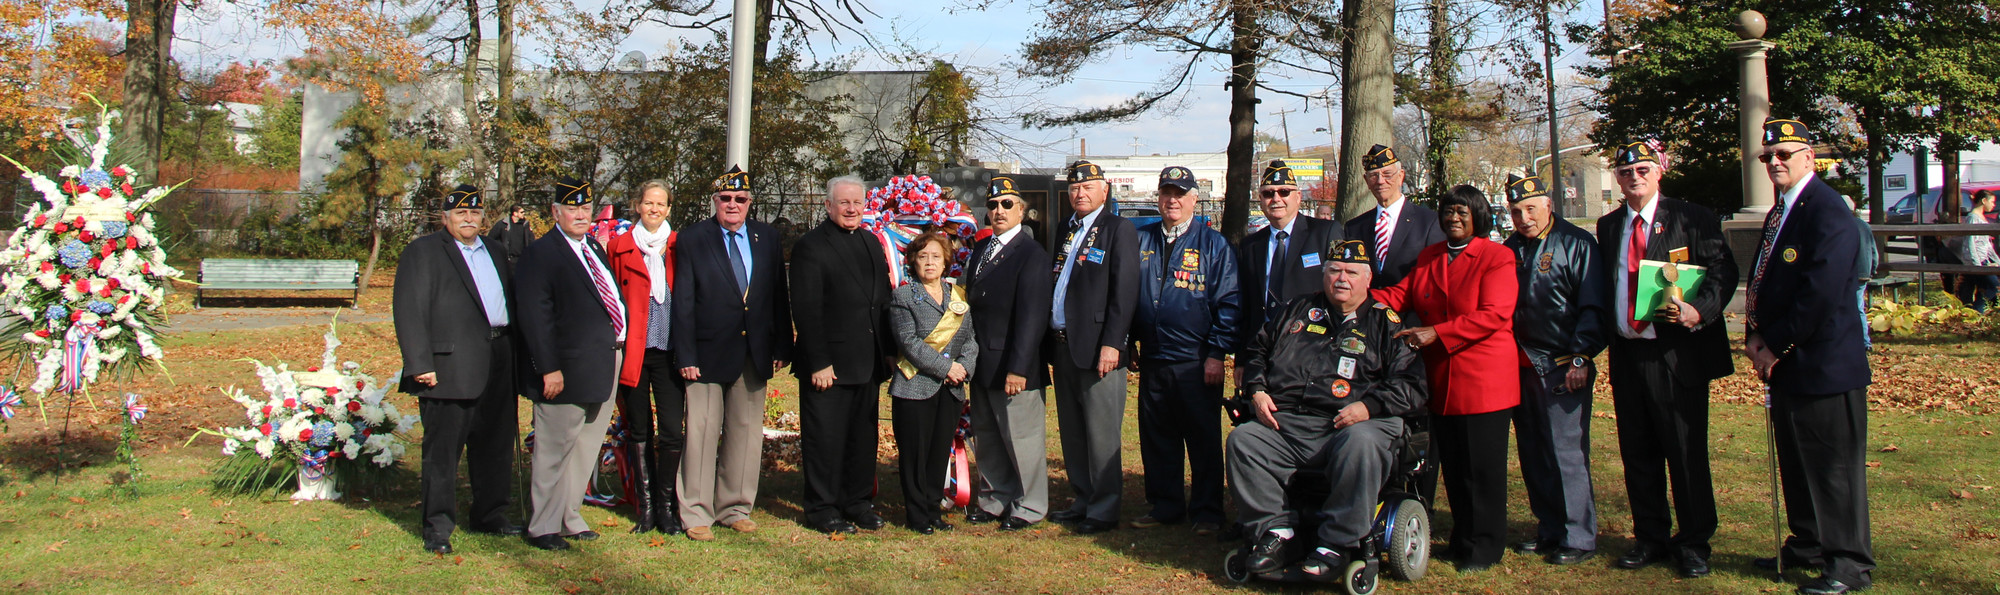 Local veterans, community members and politicians gathered on Nov. 11 in Silver Lake Park to celebrate Veterans Day.